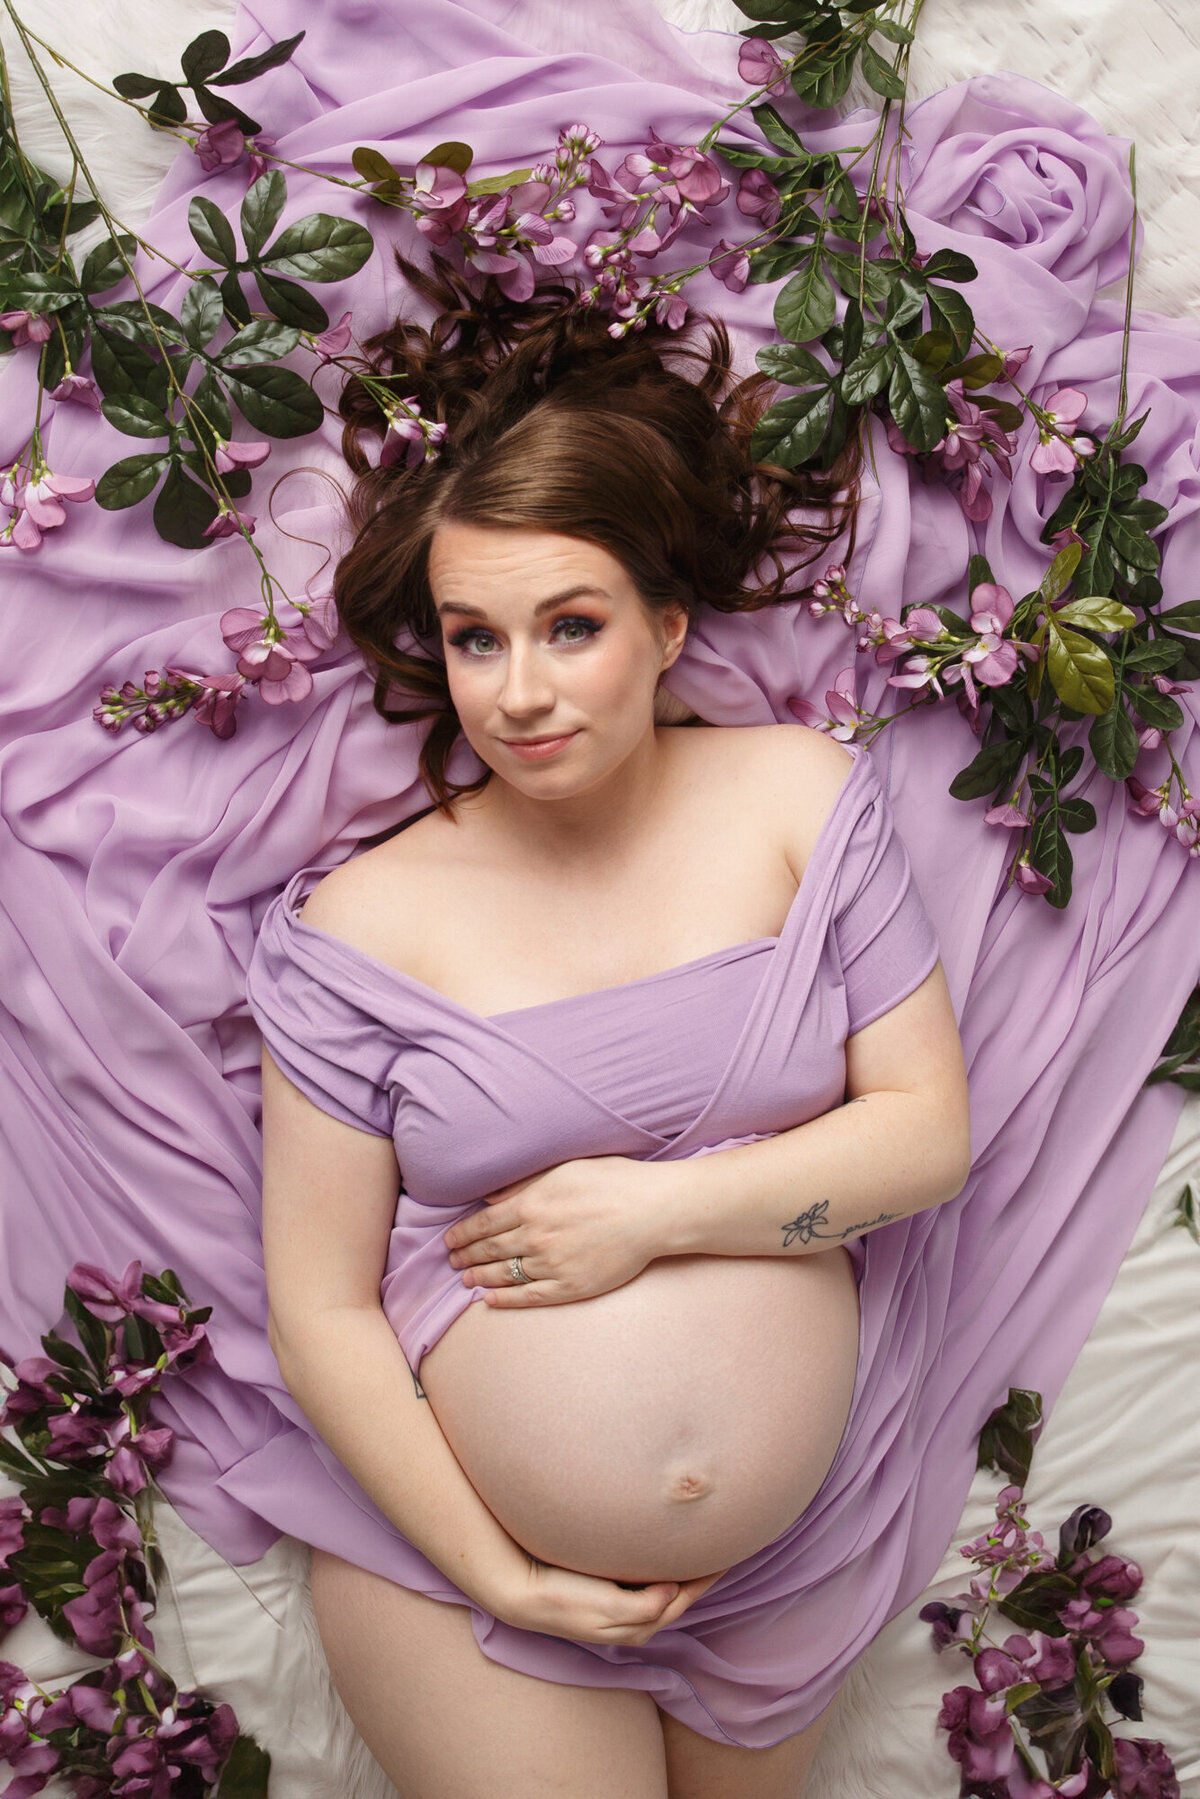 Pregnancy Portrait of a woman wrapped in a lavendar fabric with purple flowers